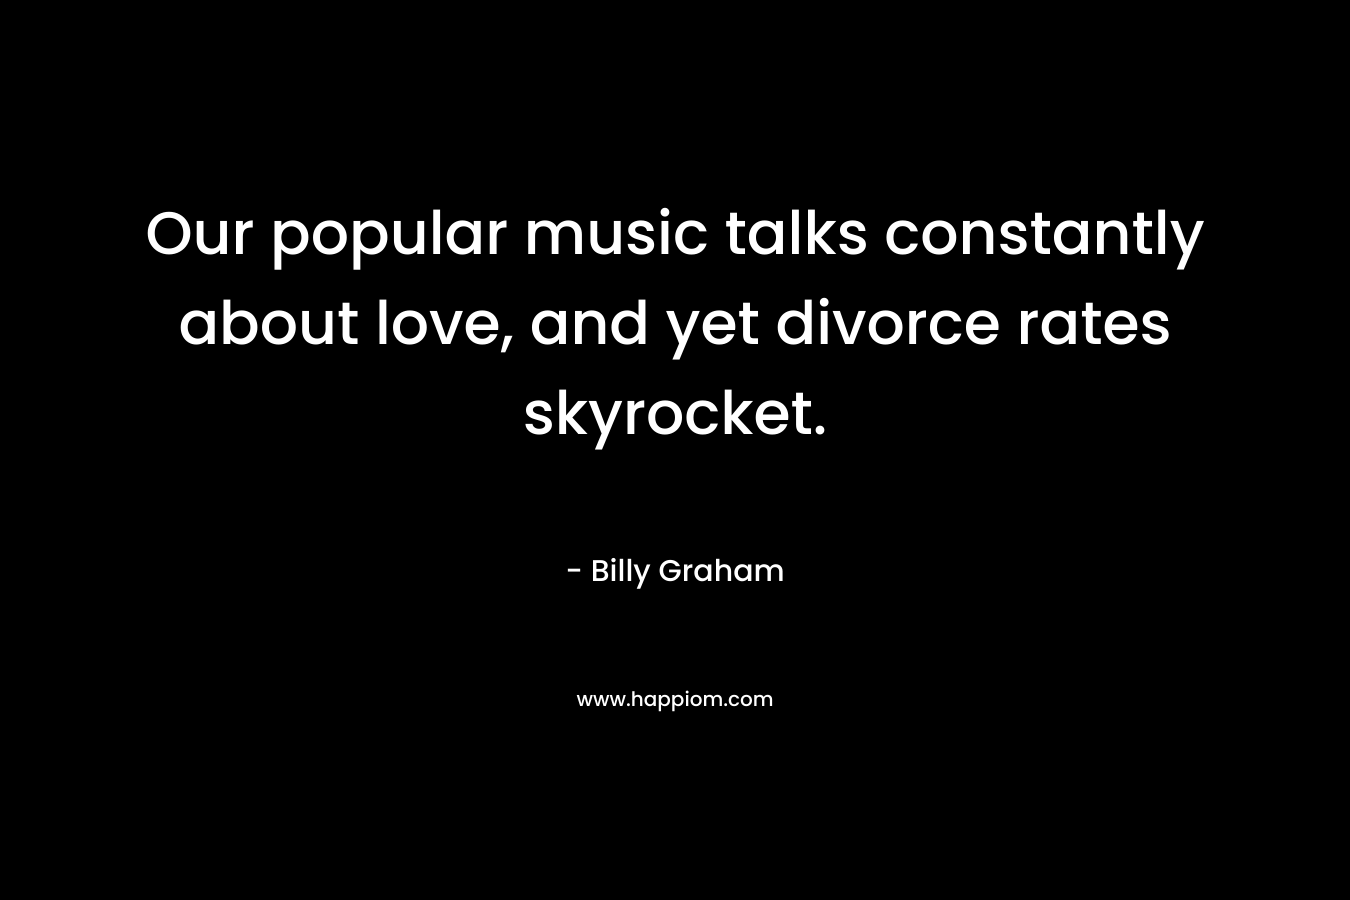 Our popular music talks constantly about love, and yet divorce rates skyrocket. – Billy Graham